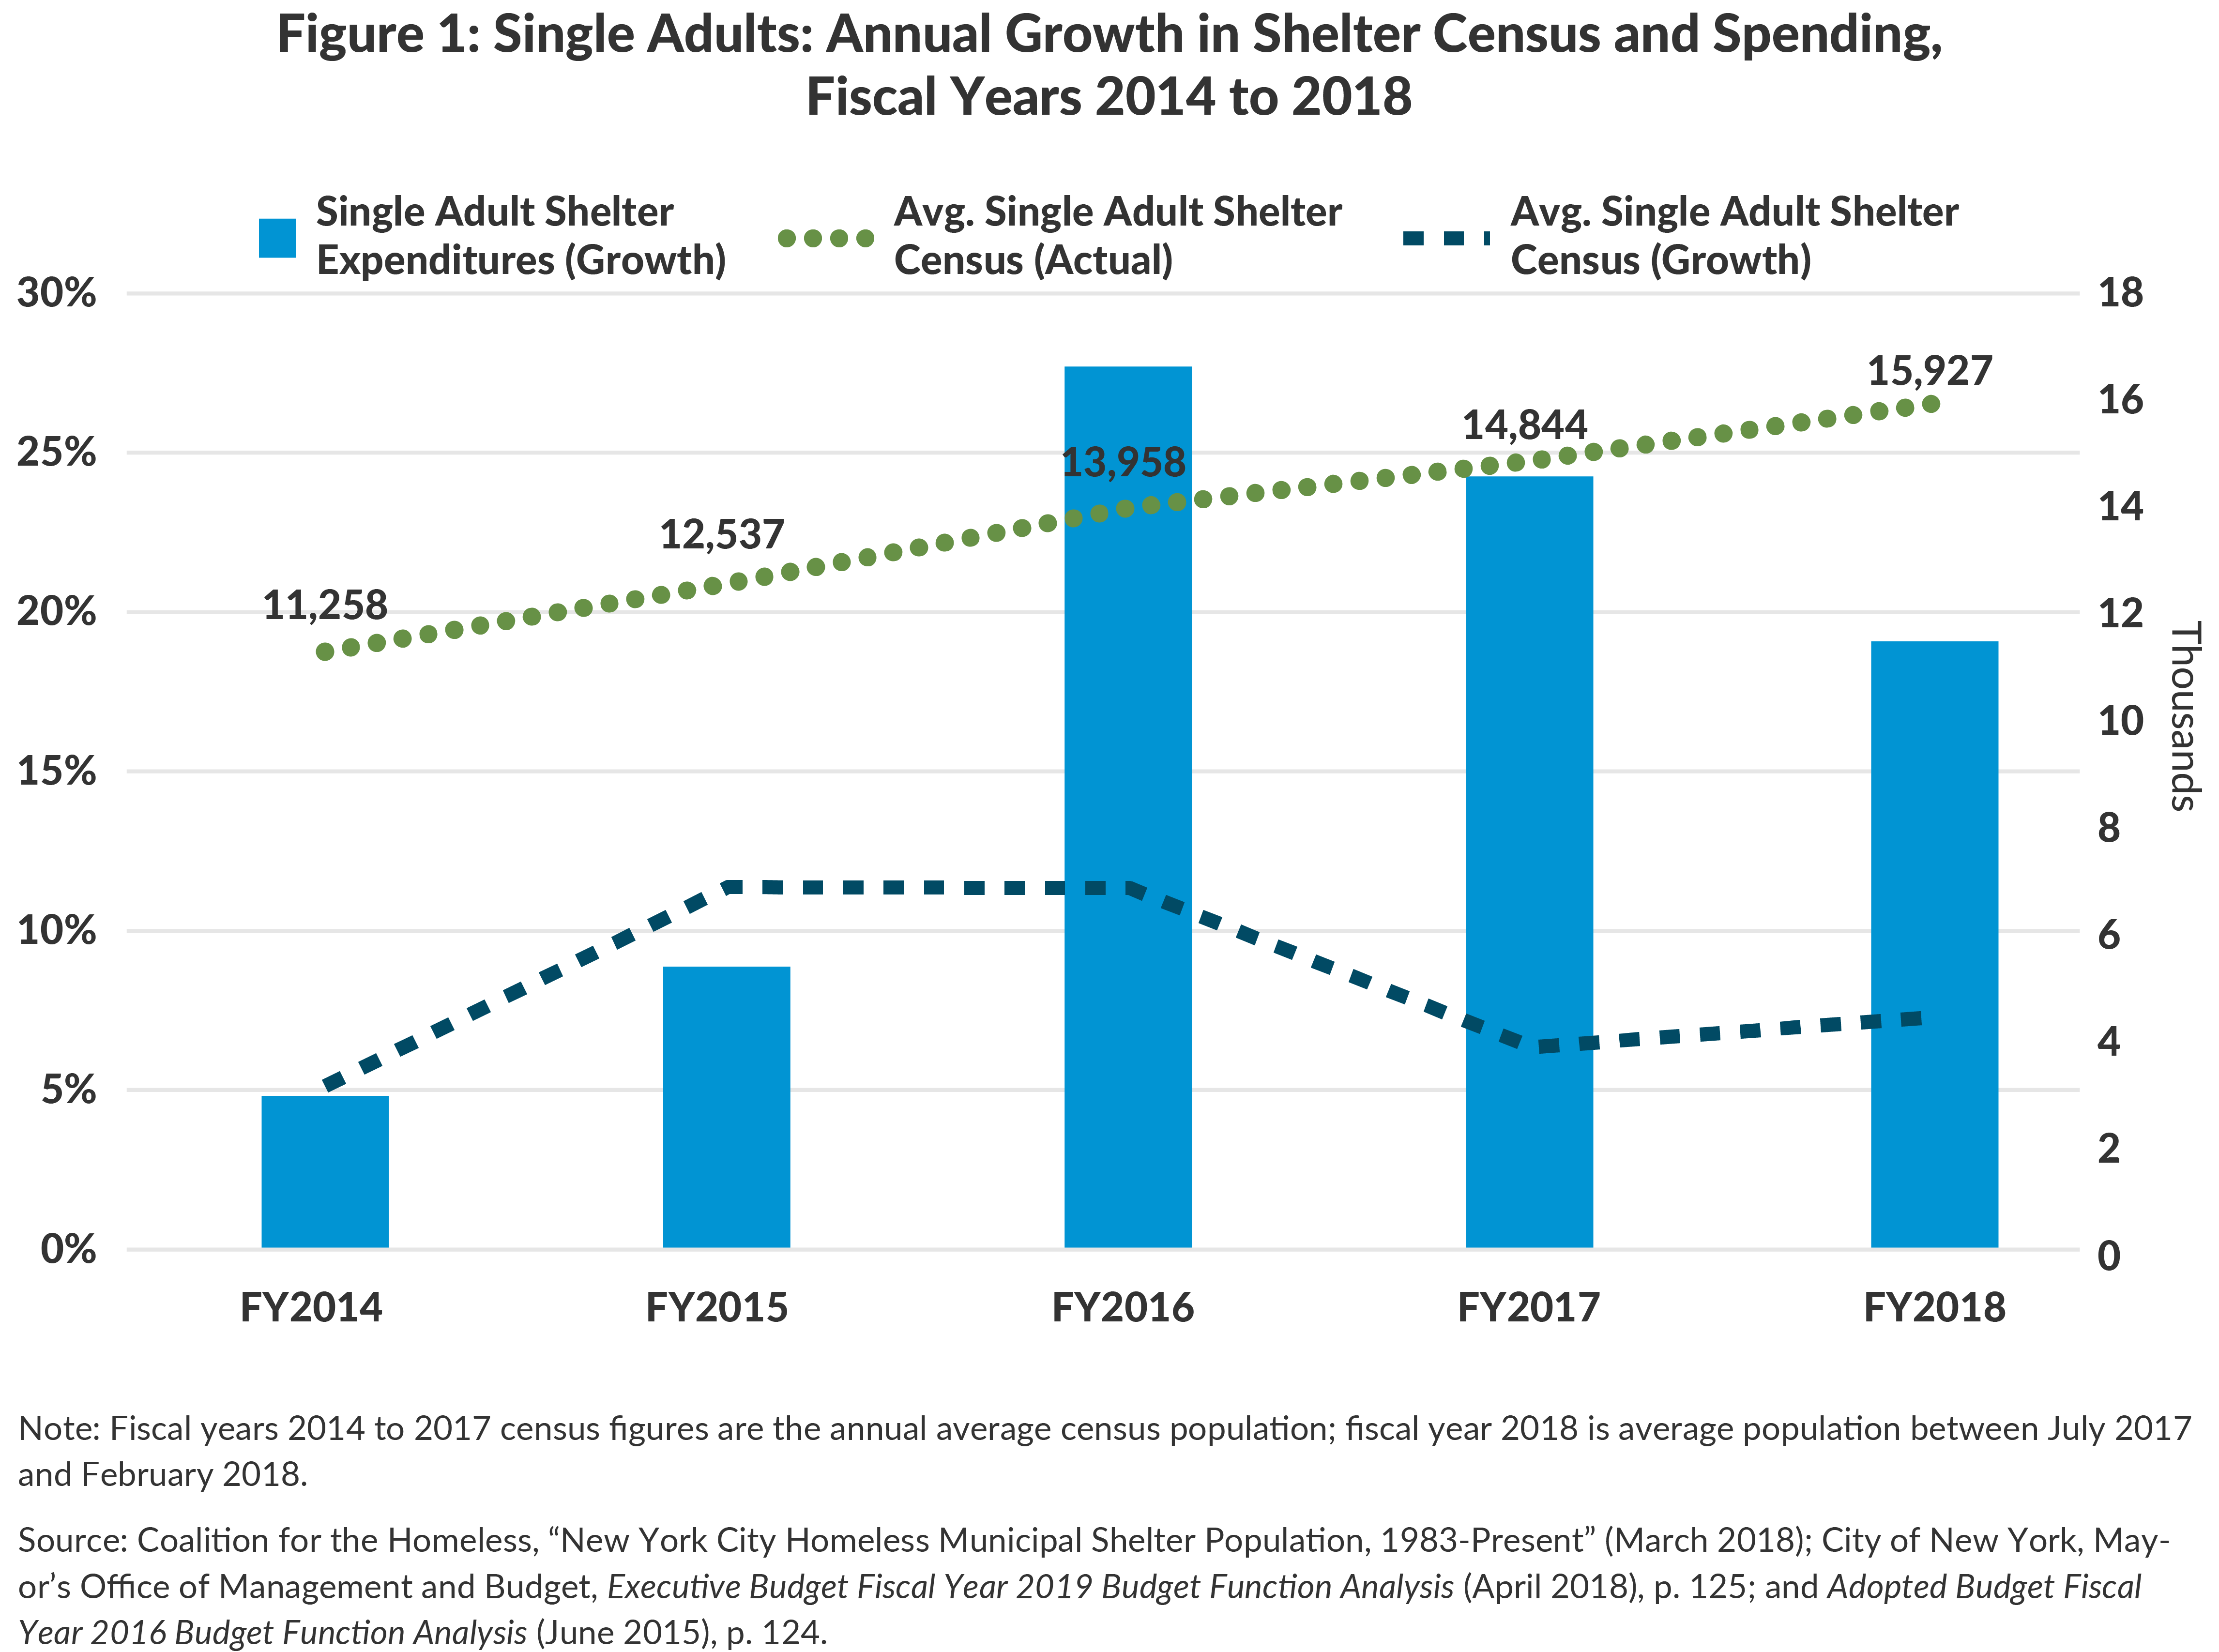 Figure 1: Single Adults: Annual Growth in Shelter Census and Spending,Fiscal Years 2014 to 2018